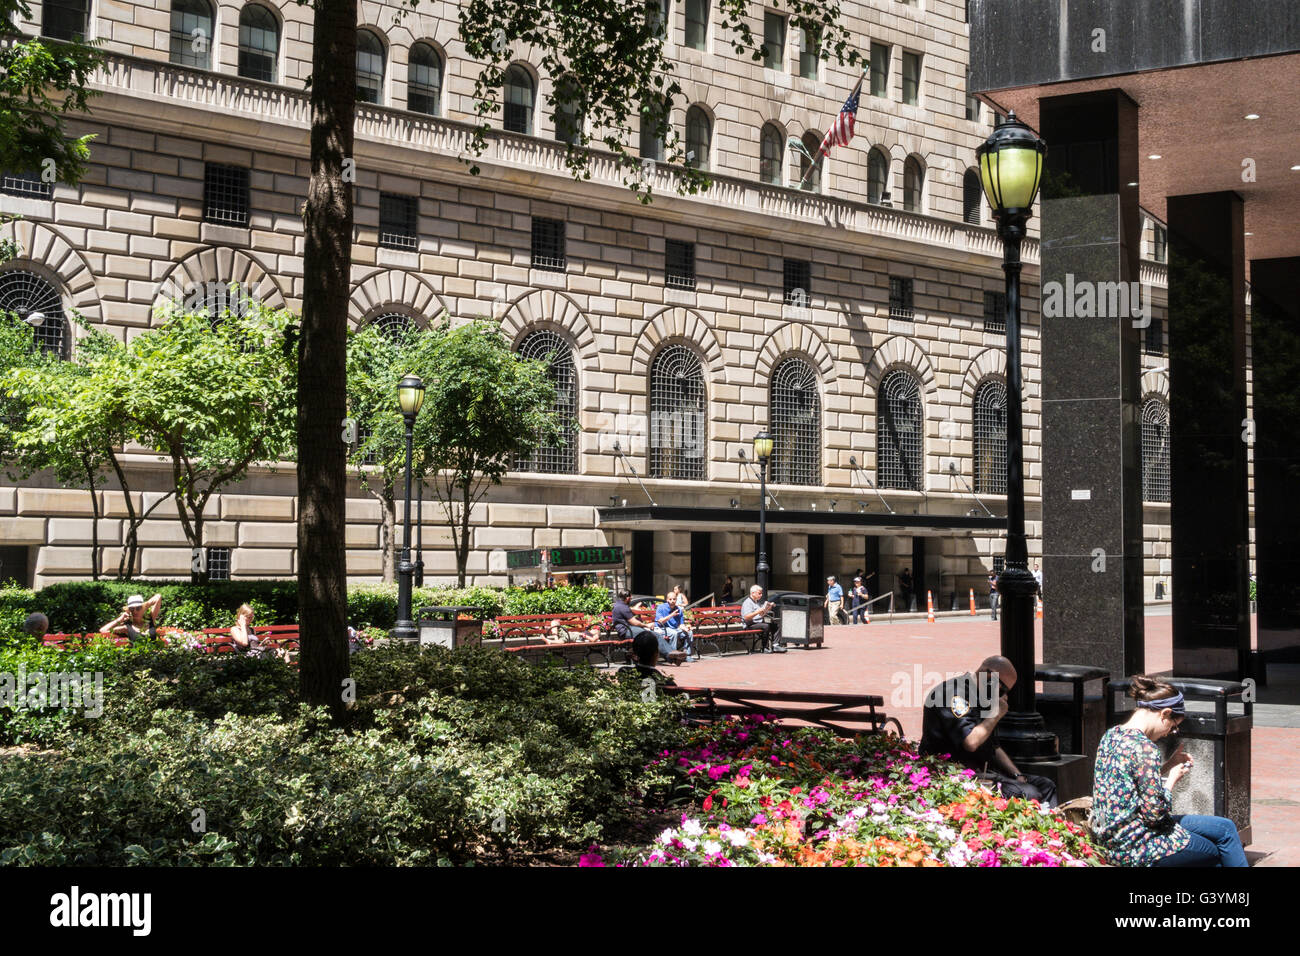 Public Plaza in front of The Federal Reserve Bank, NYC Stock Photo